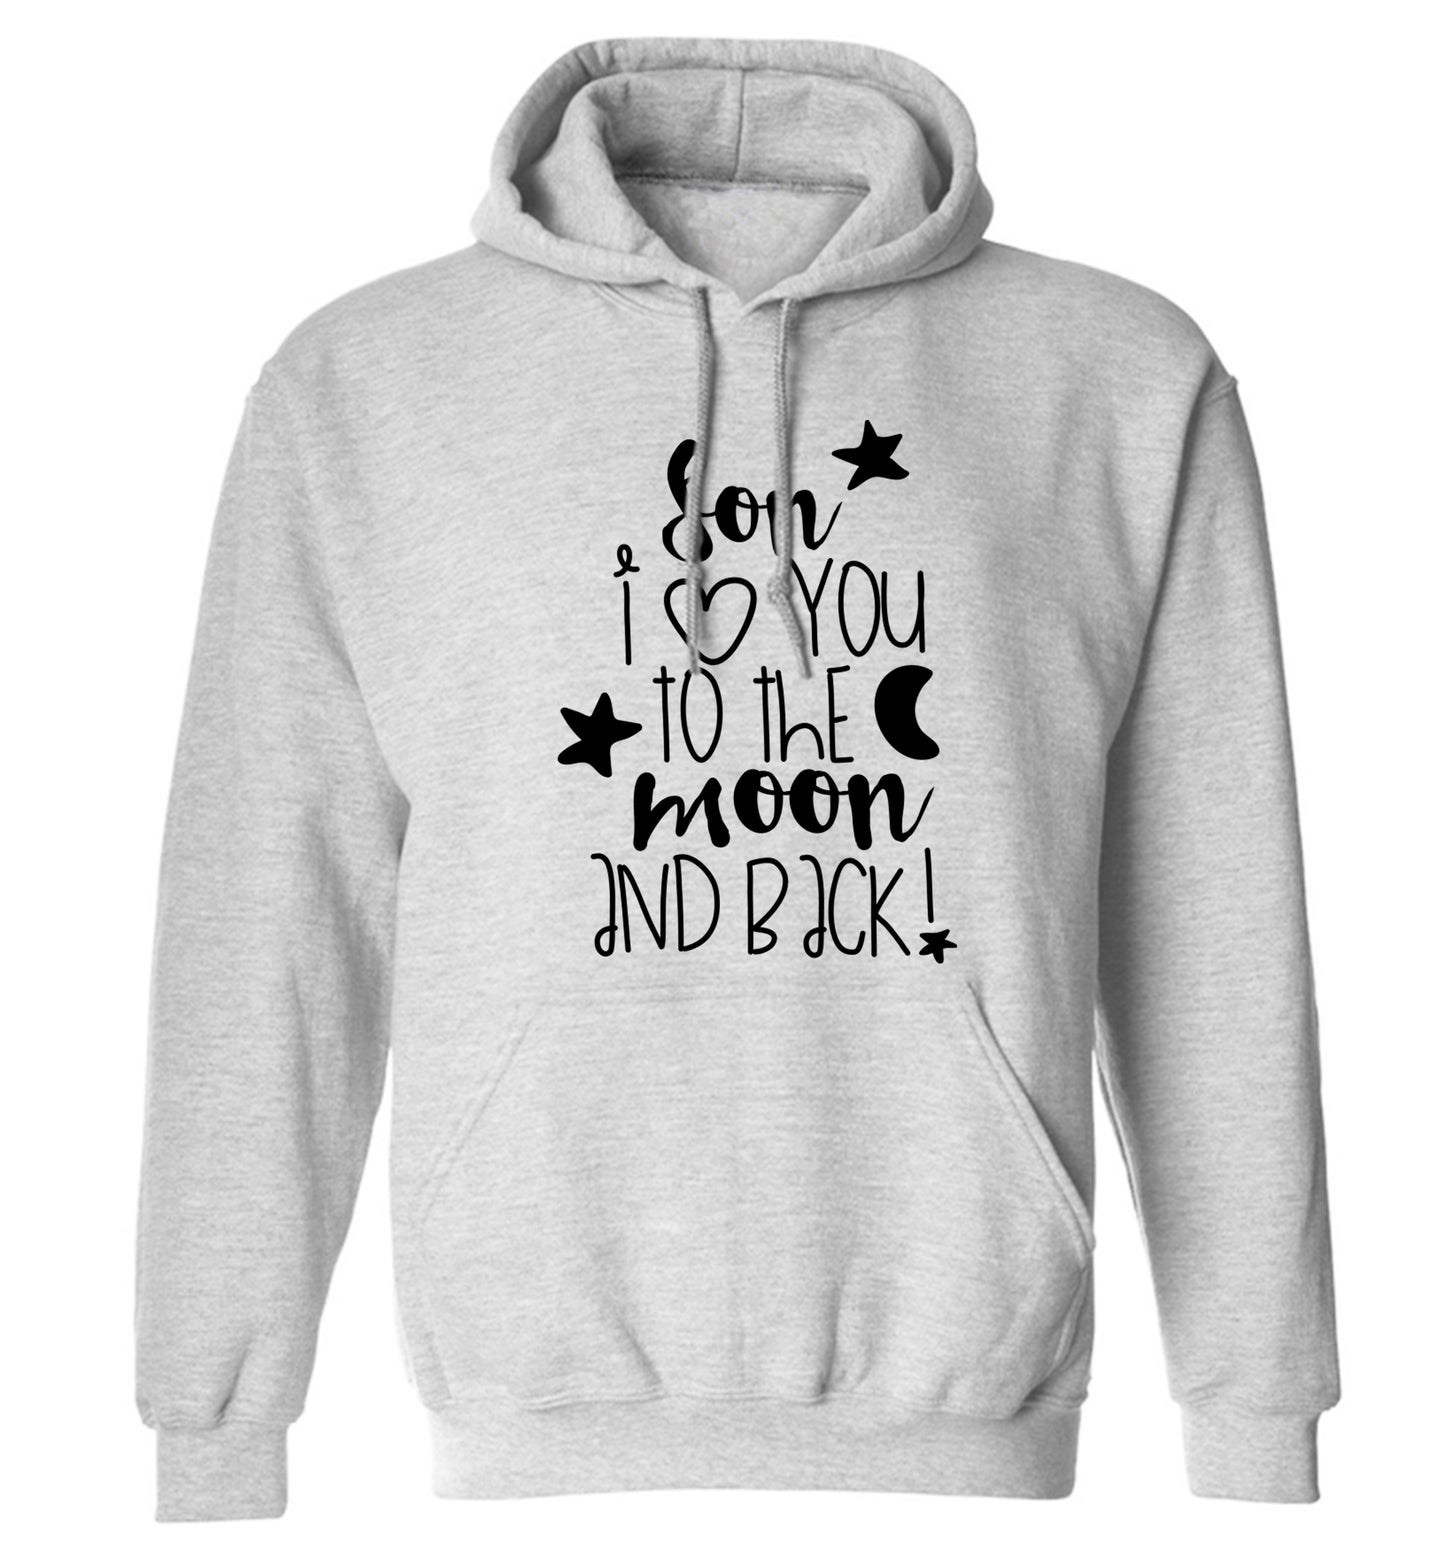 Son I love you to the moon and back adults unisex grey hoodie 2XL